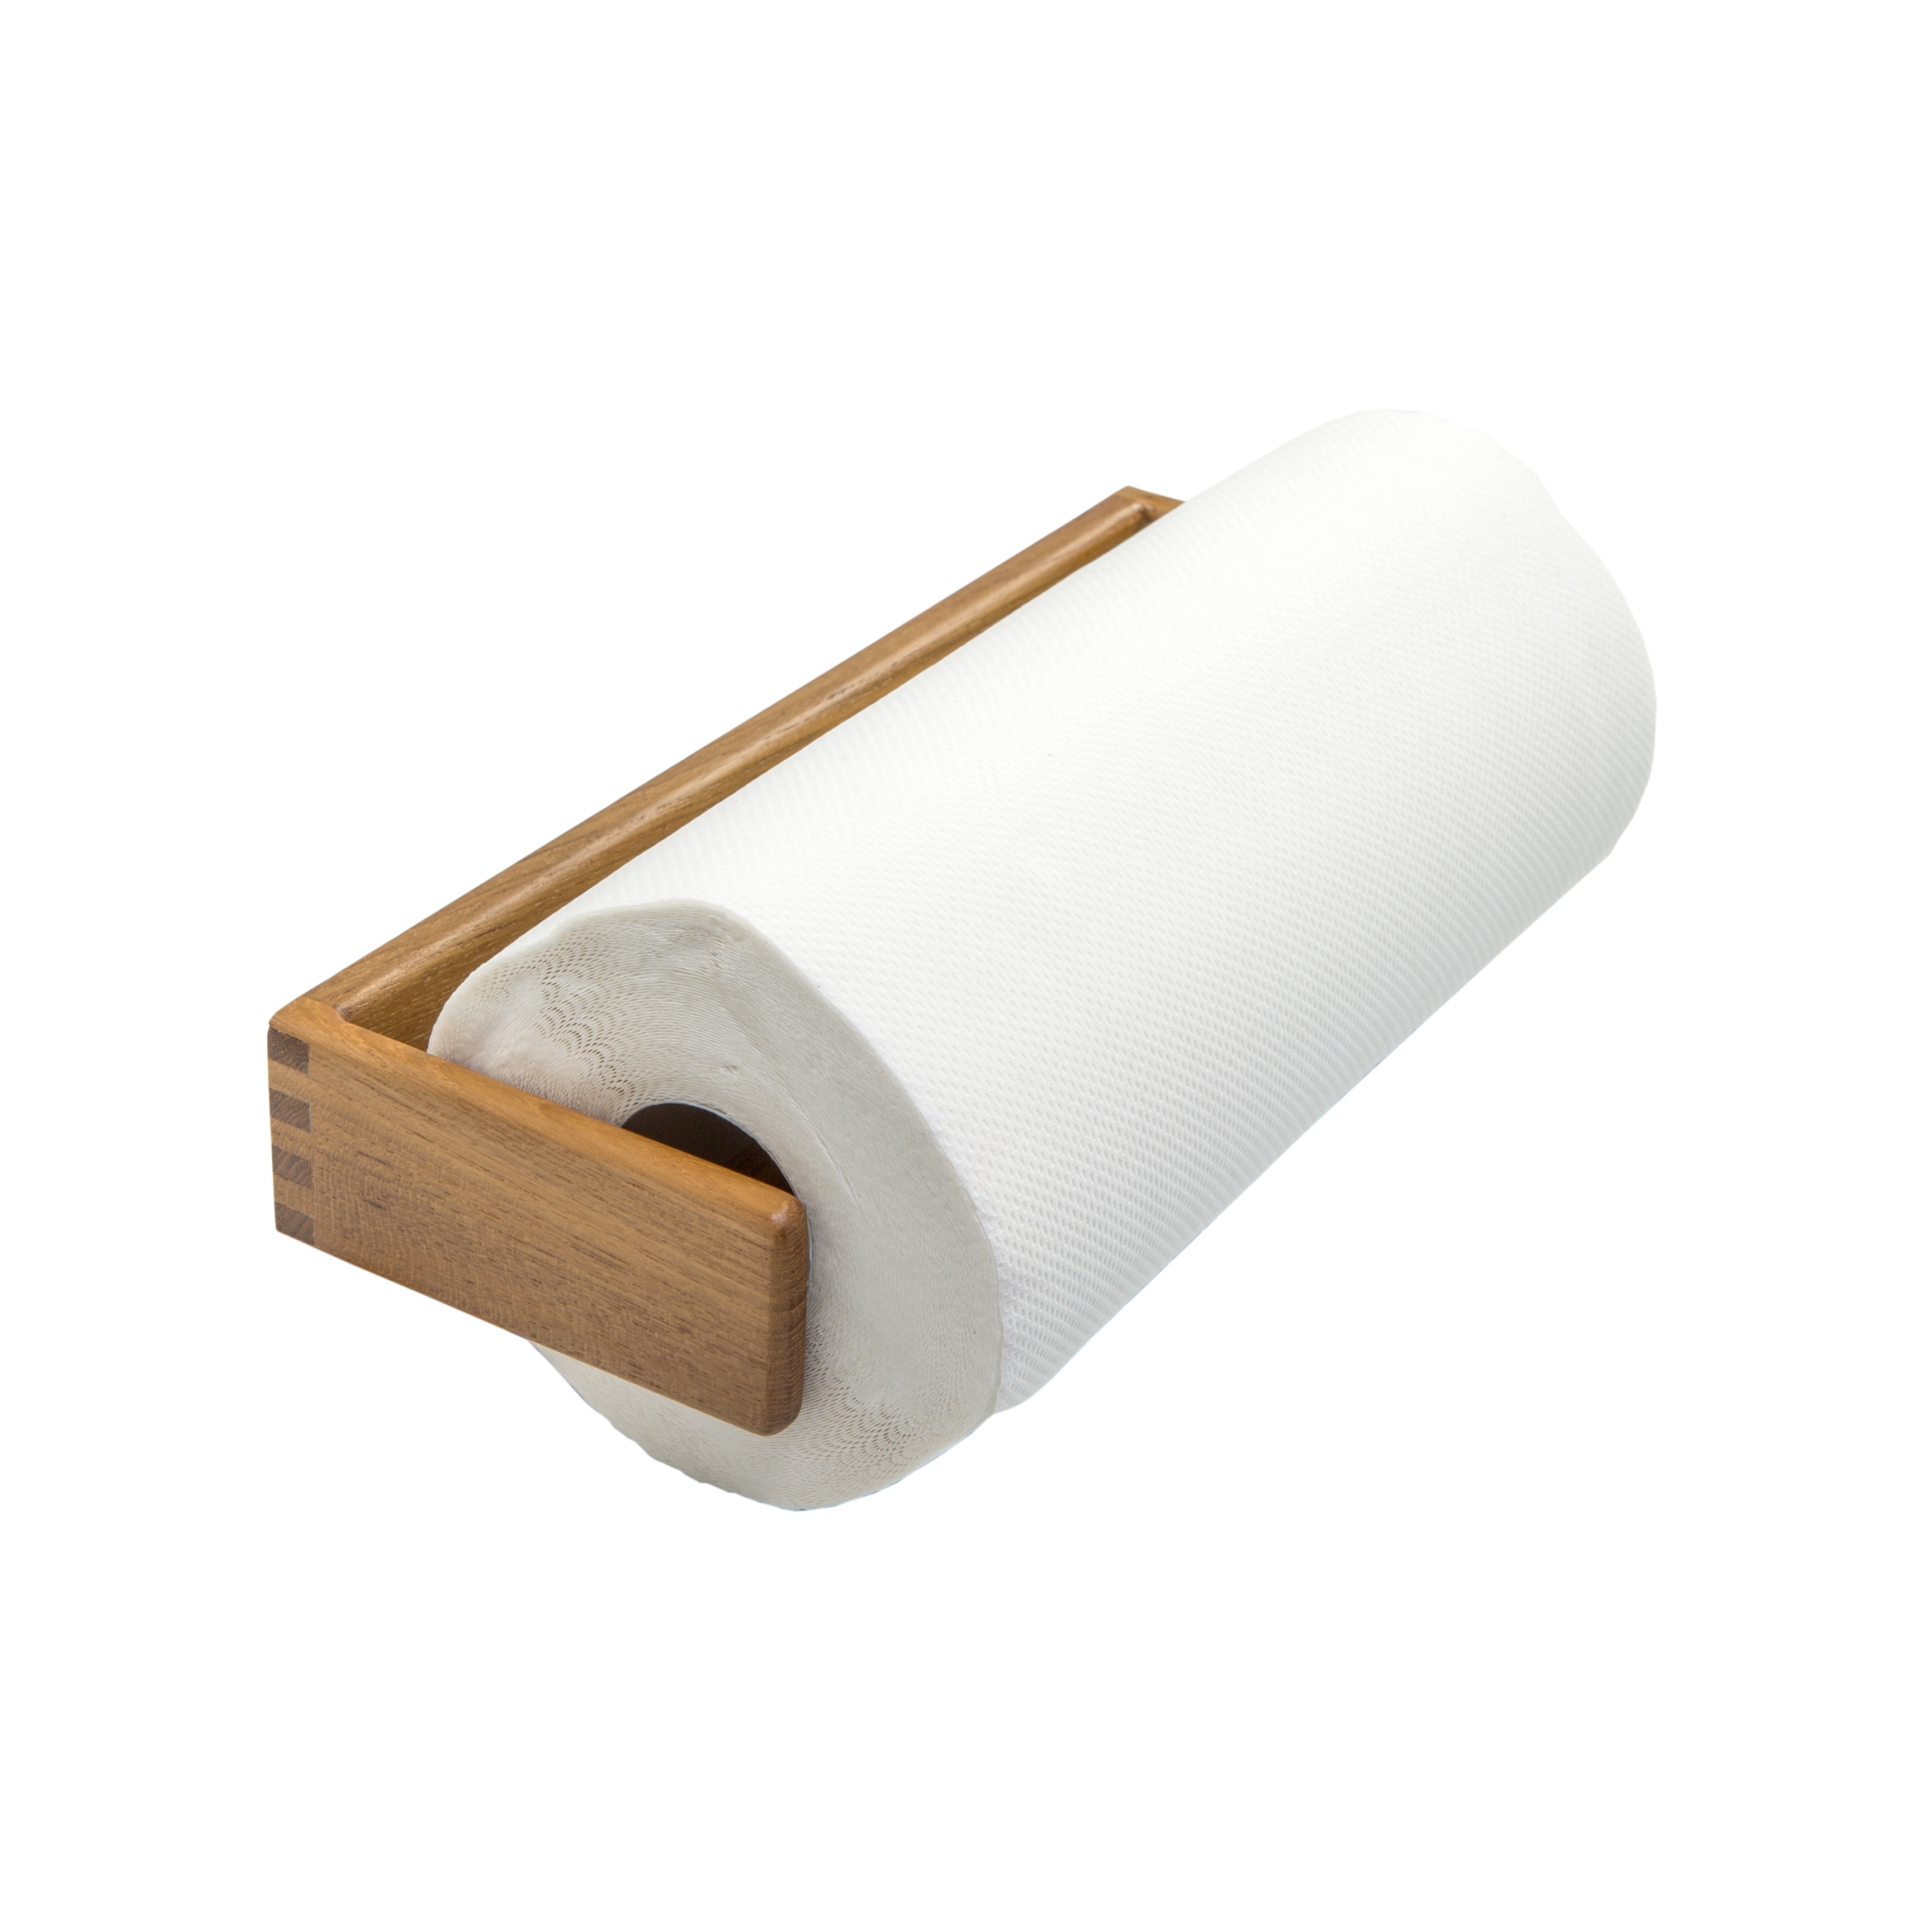 https://ak1.ostkcdn.com/images/products/is/images/direct/c6c1184e84e2f20bbc59ef16159e8b36eca8c45b/Teak-Wall-Mount-Paper-Towel-Holder.jpg